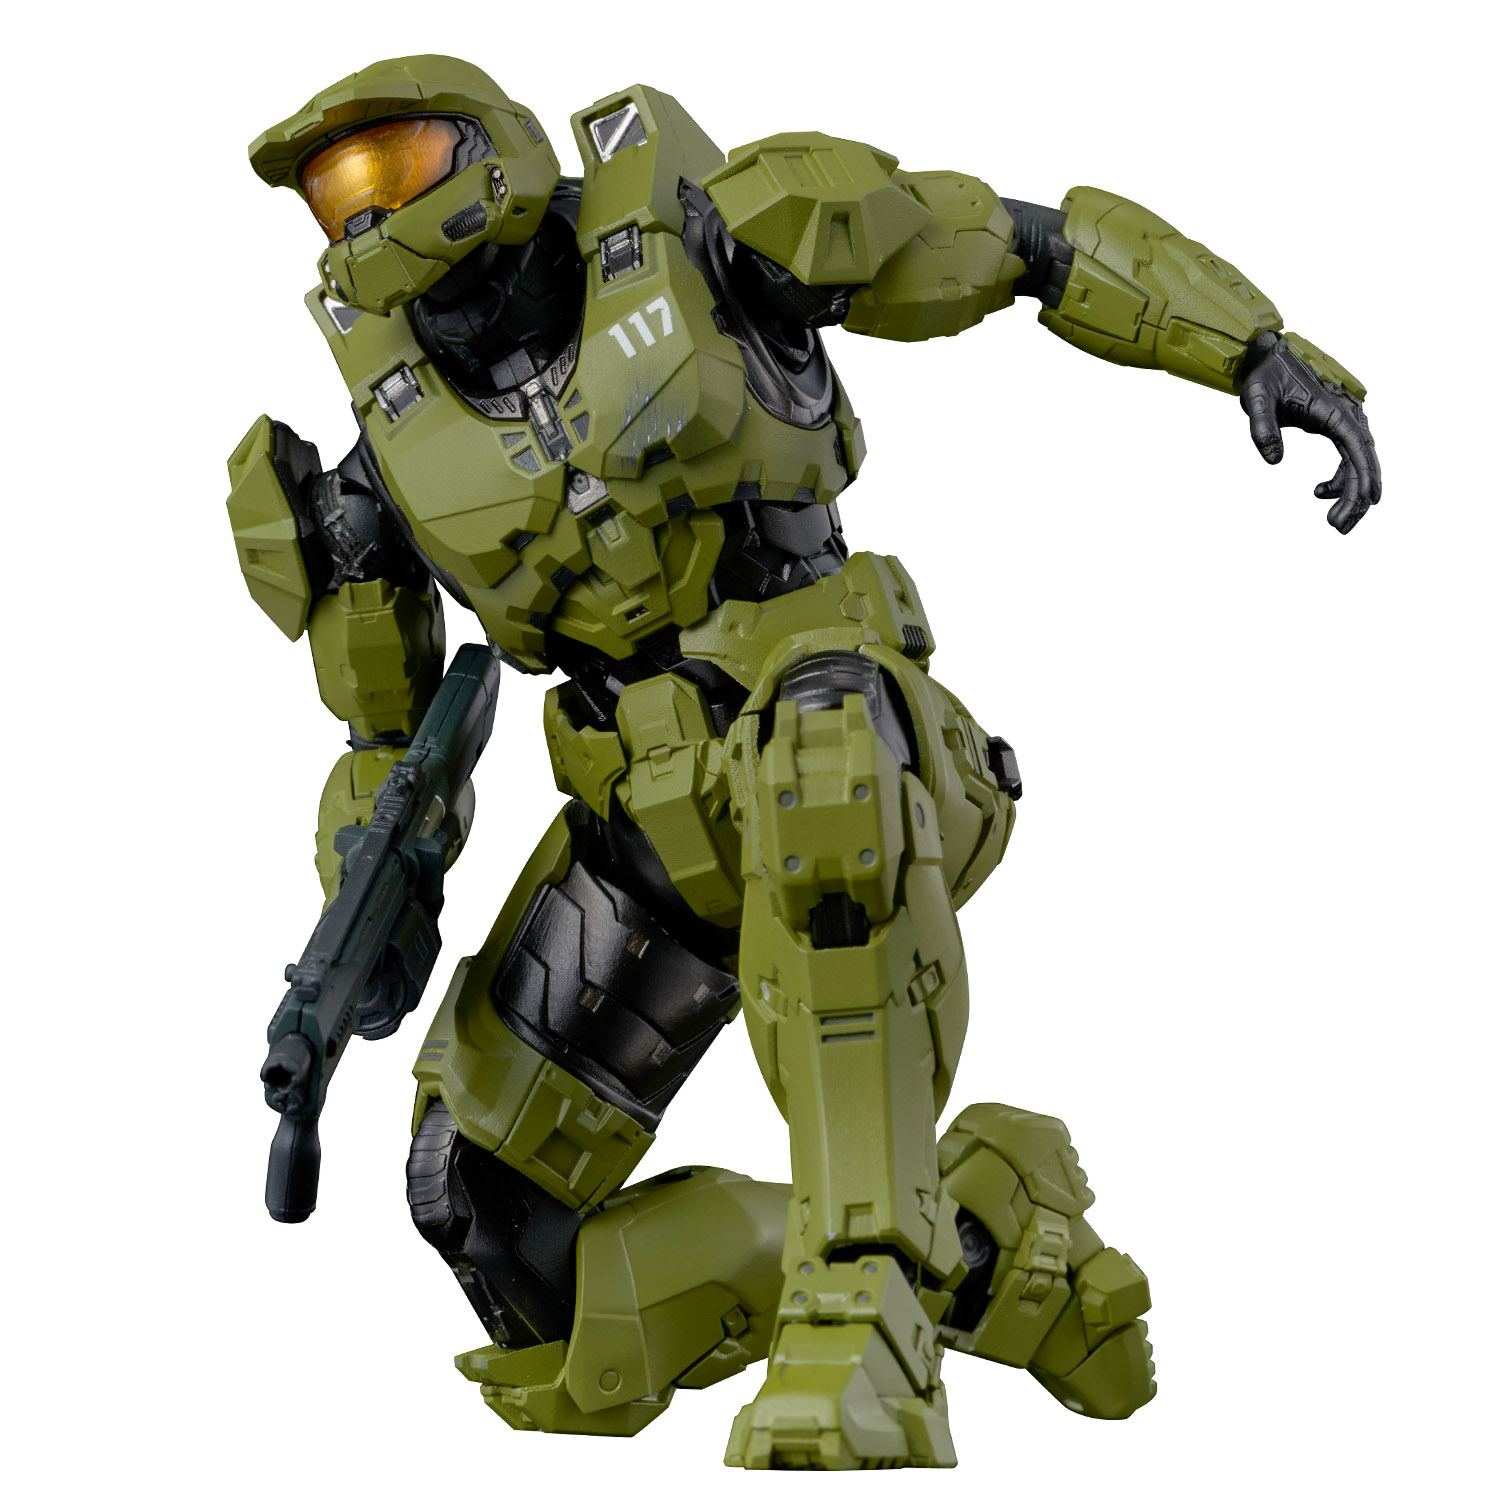 RE:EDIT Halo Infinite 1/12 Scale Action Figure: Master Chief Mjolnir 